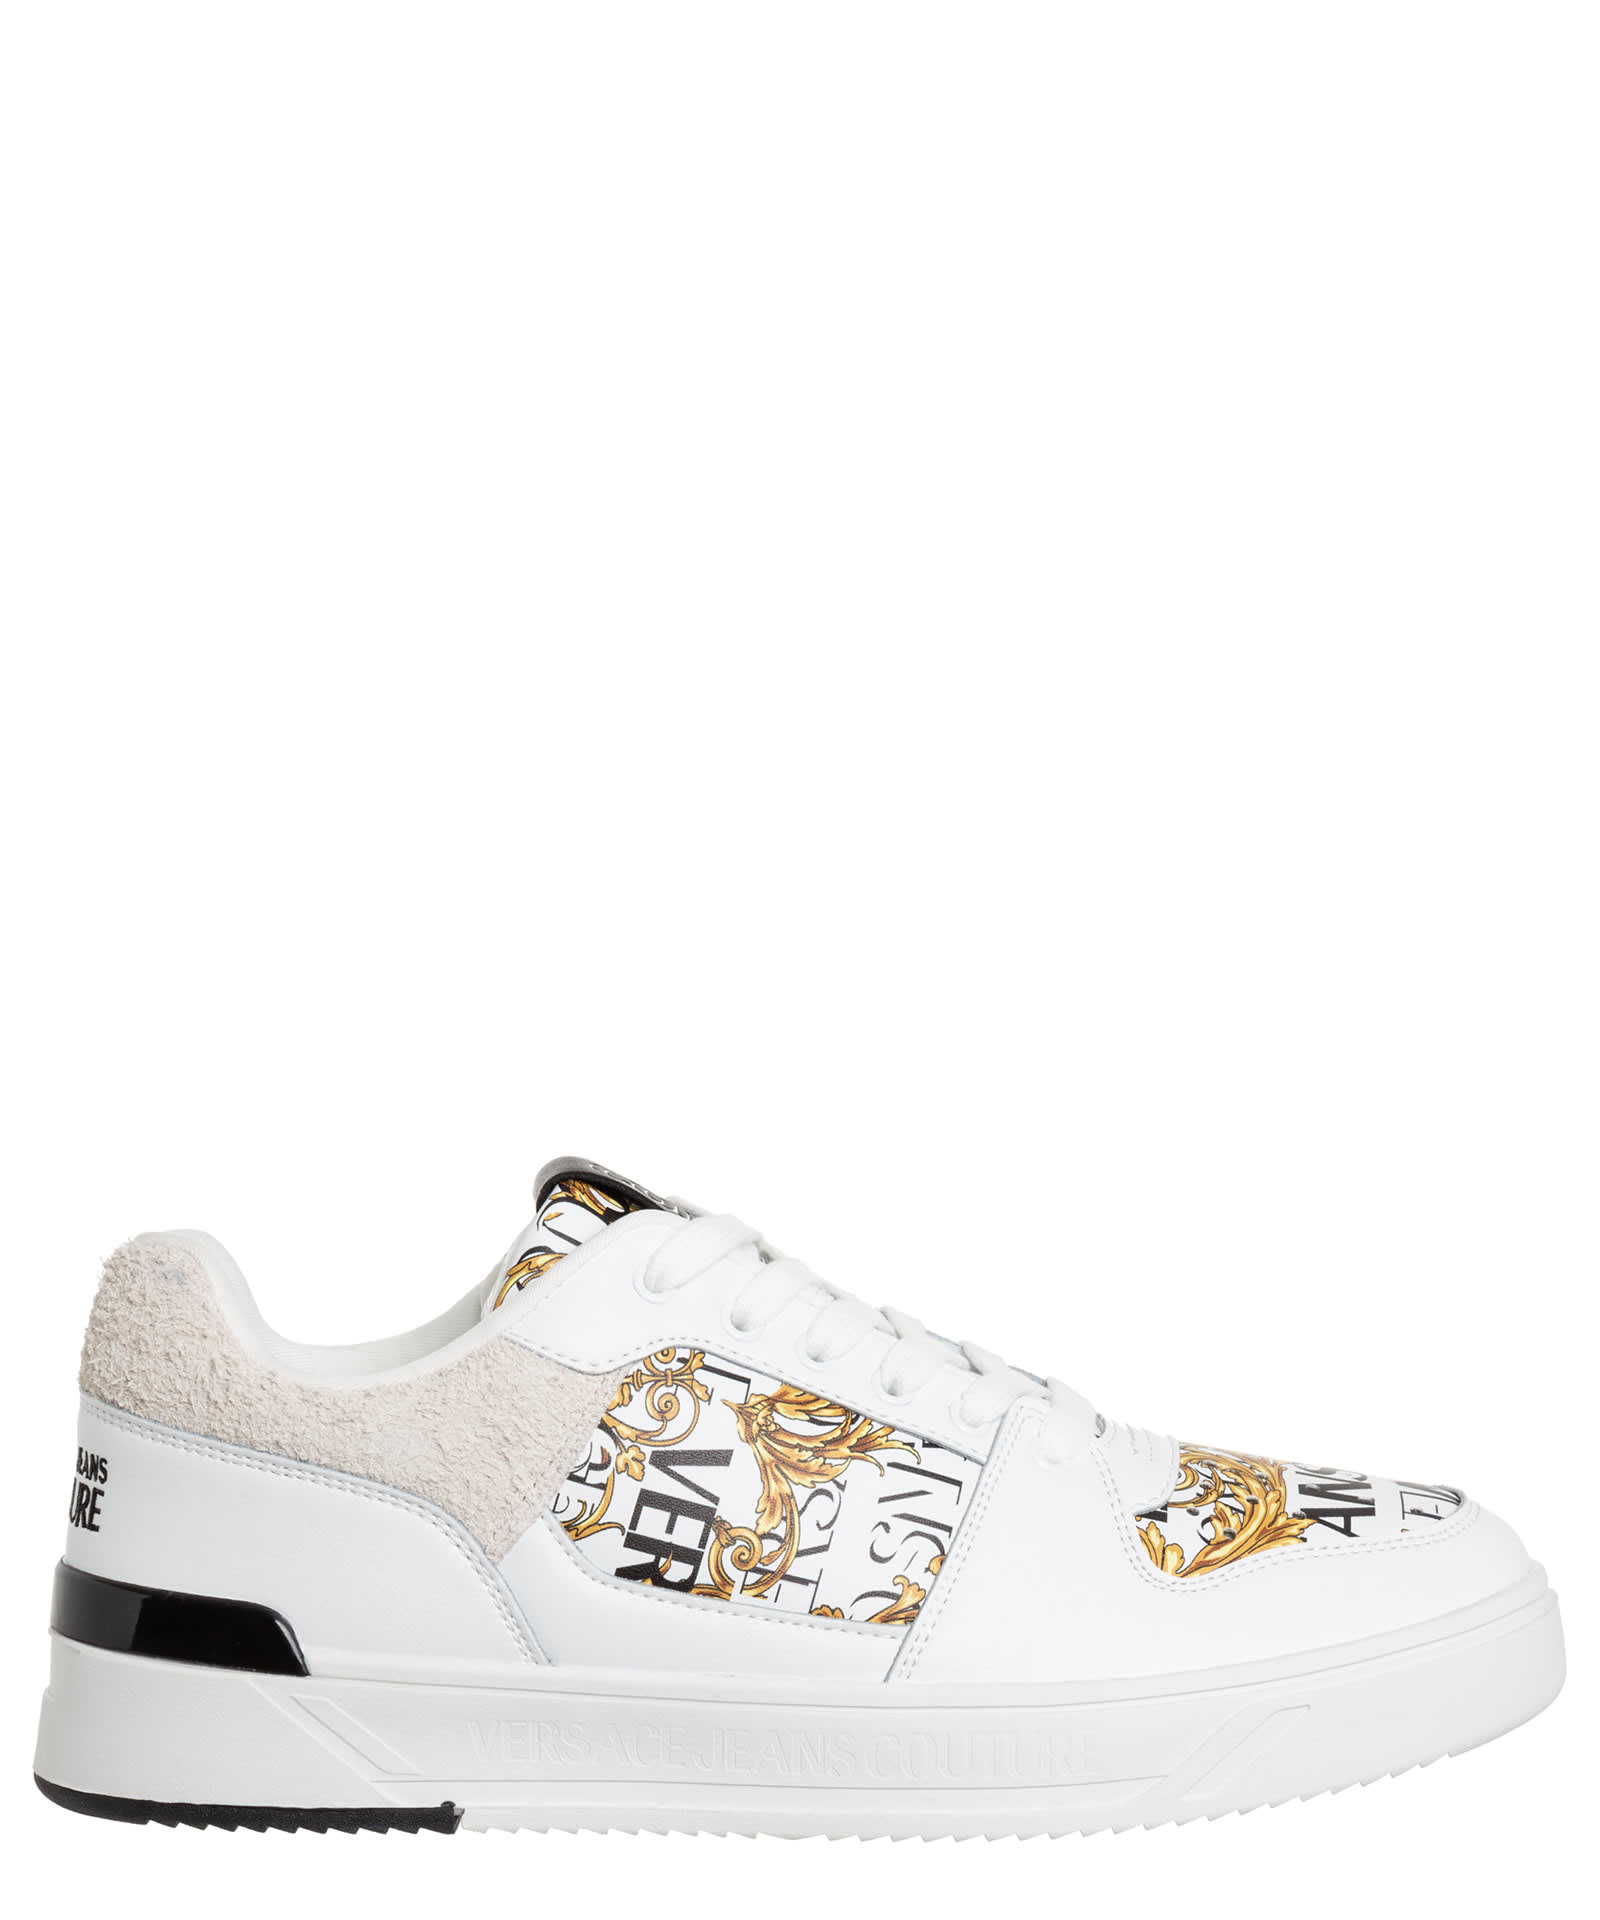 VERSACE JEANS COUTURE STARLIGHT LEATHER SNEAKERS